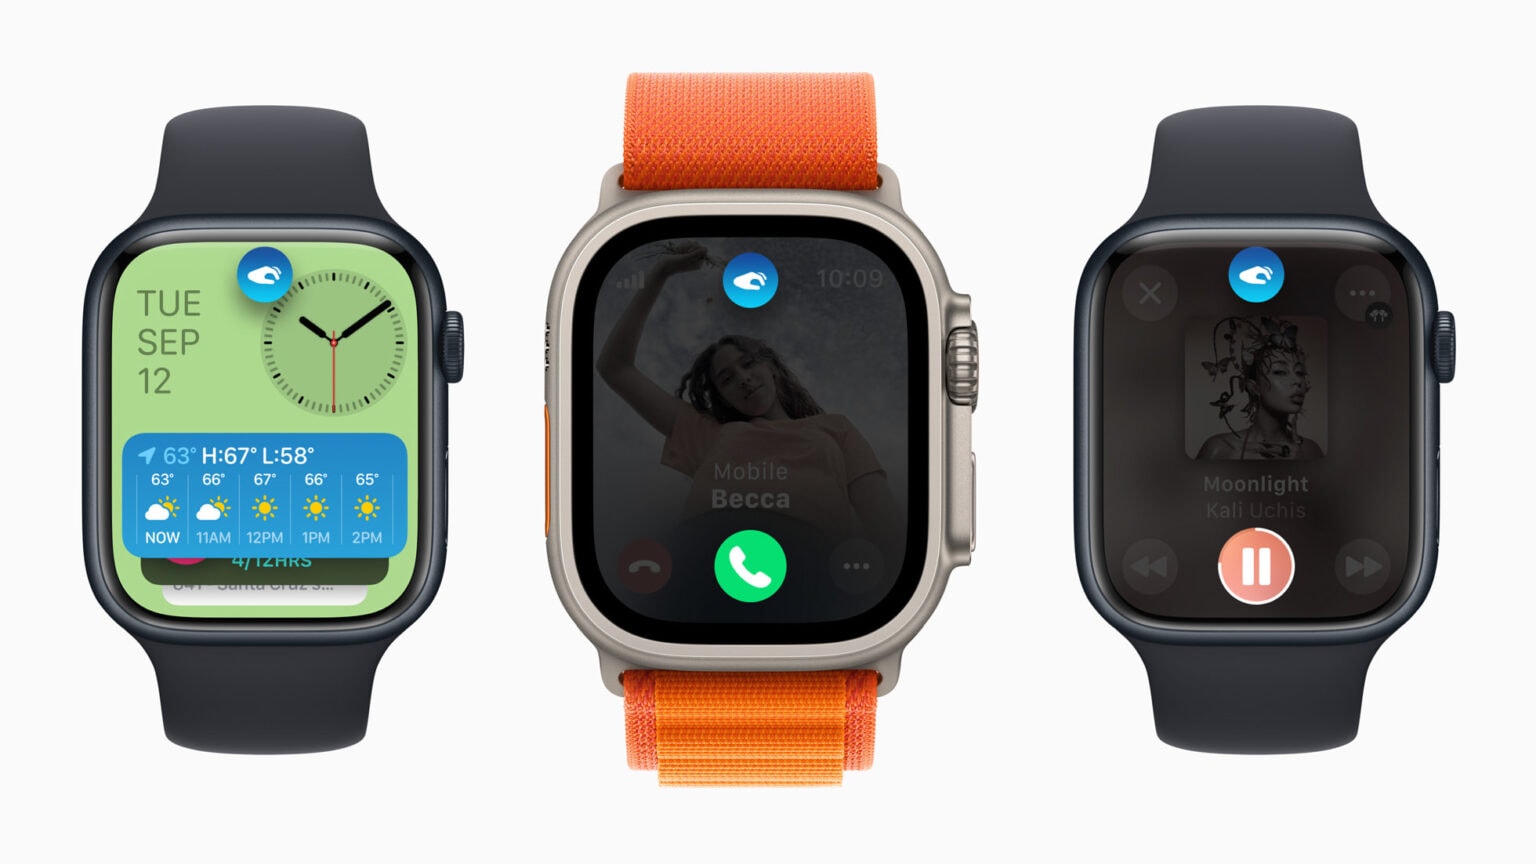 Double tap lets users select the primary action in a variety of watchOS apps and notifications.